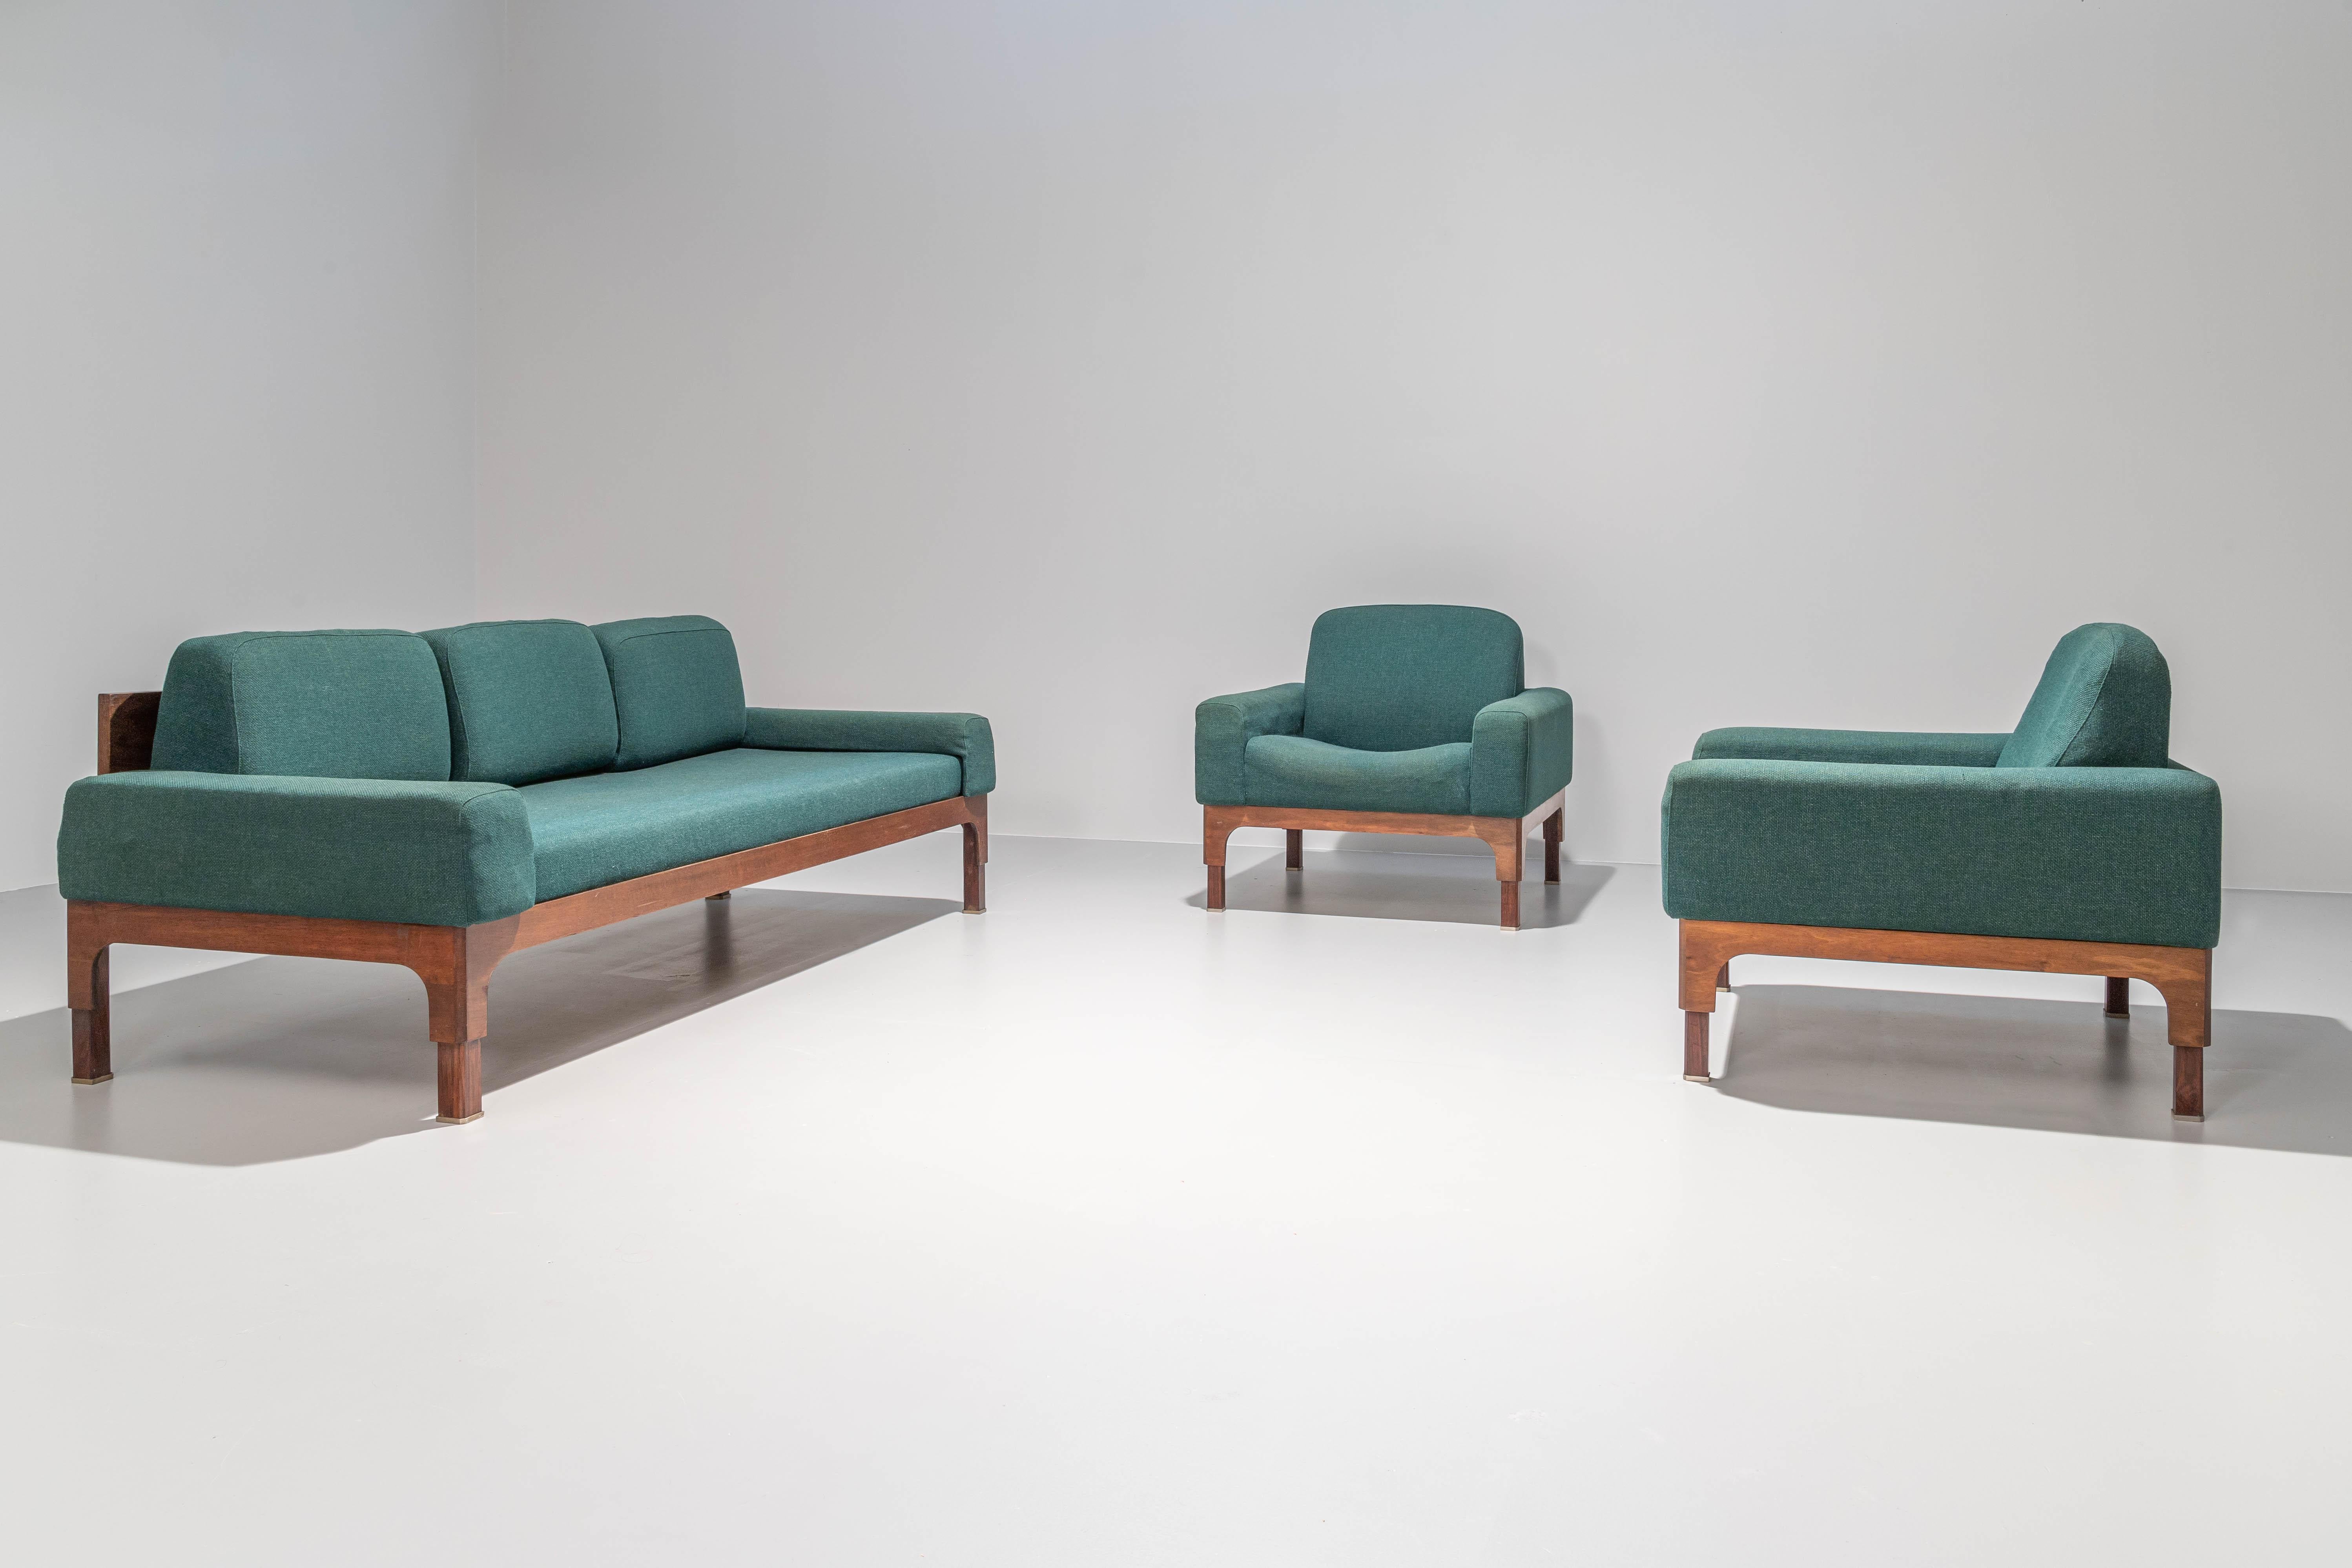 Mid-Century Modern ‘Romantica’ Living Room Set by Piero Ranzani for Elam in Walnut, Italy, 1950's For Sale